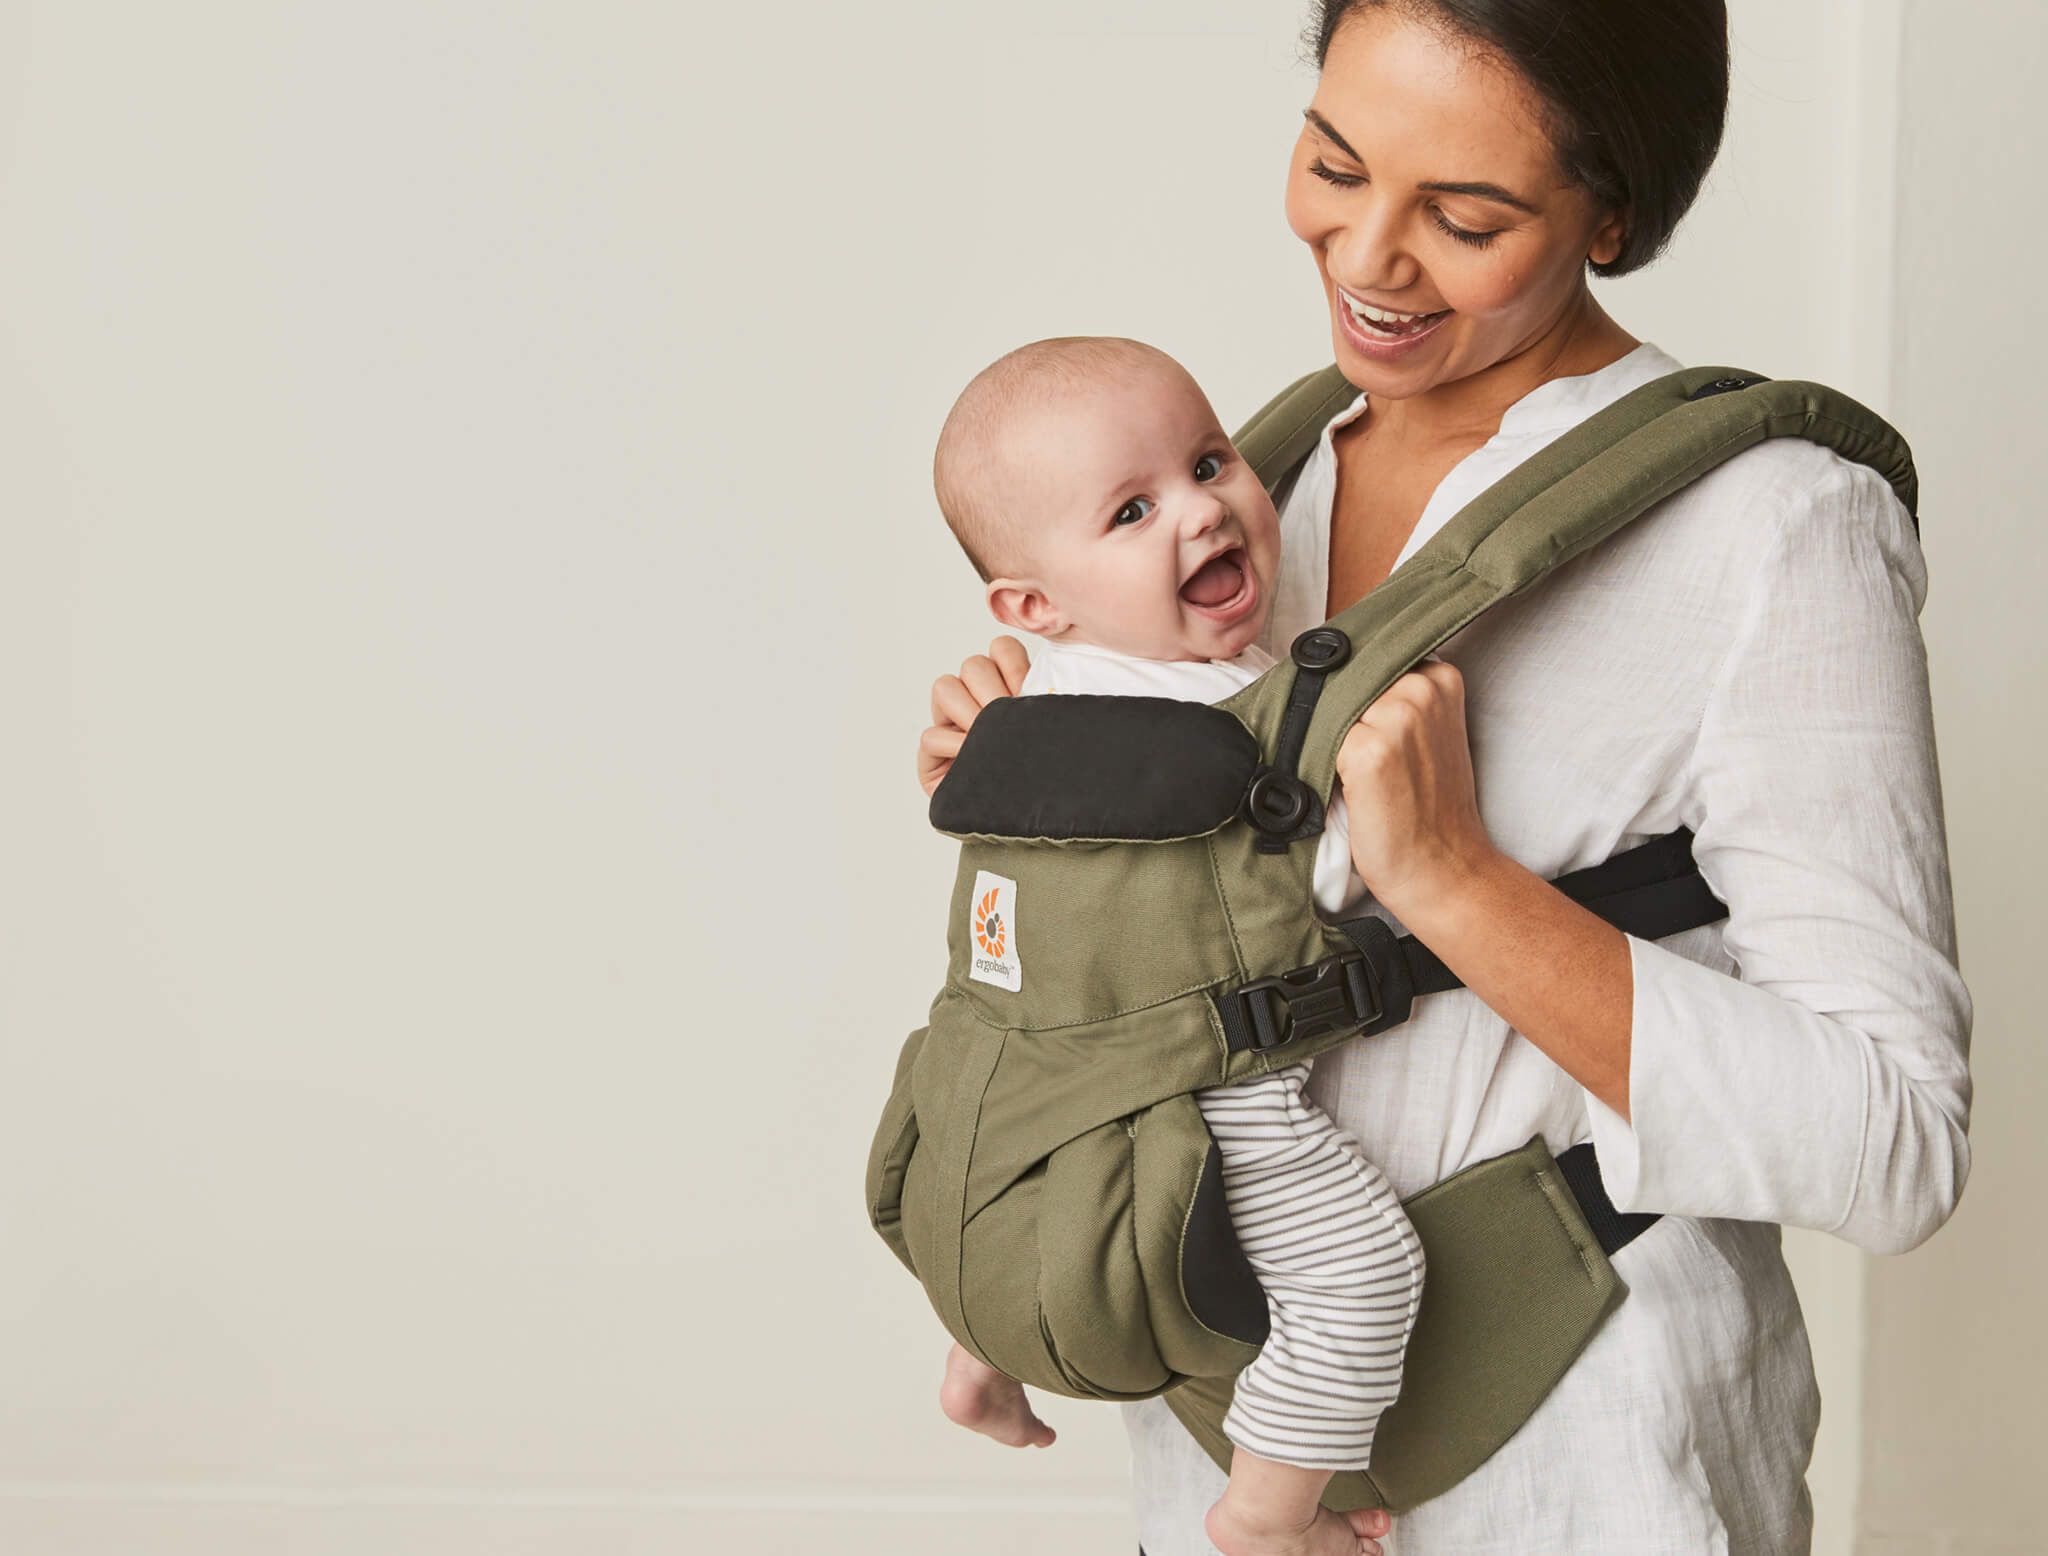 The new-mum capsule wardrobe: 6 pieces to see you through maternity leave